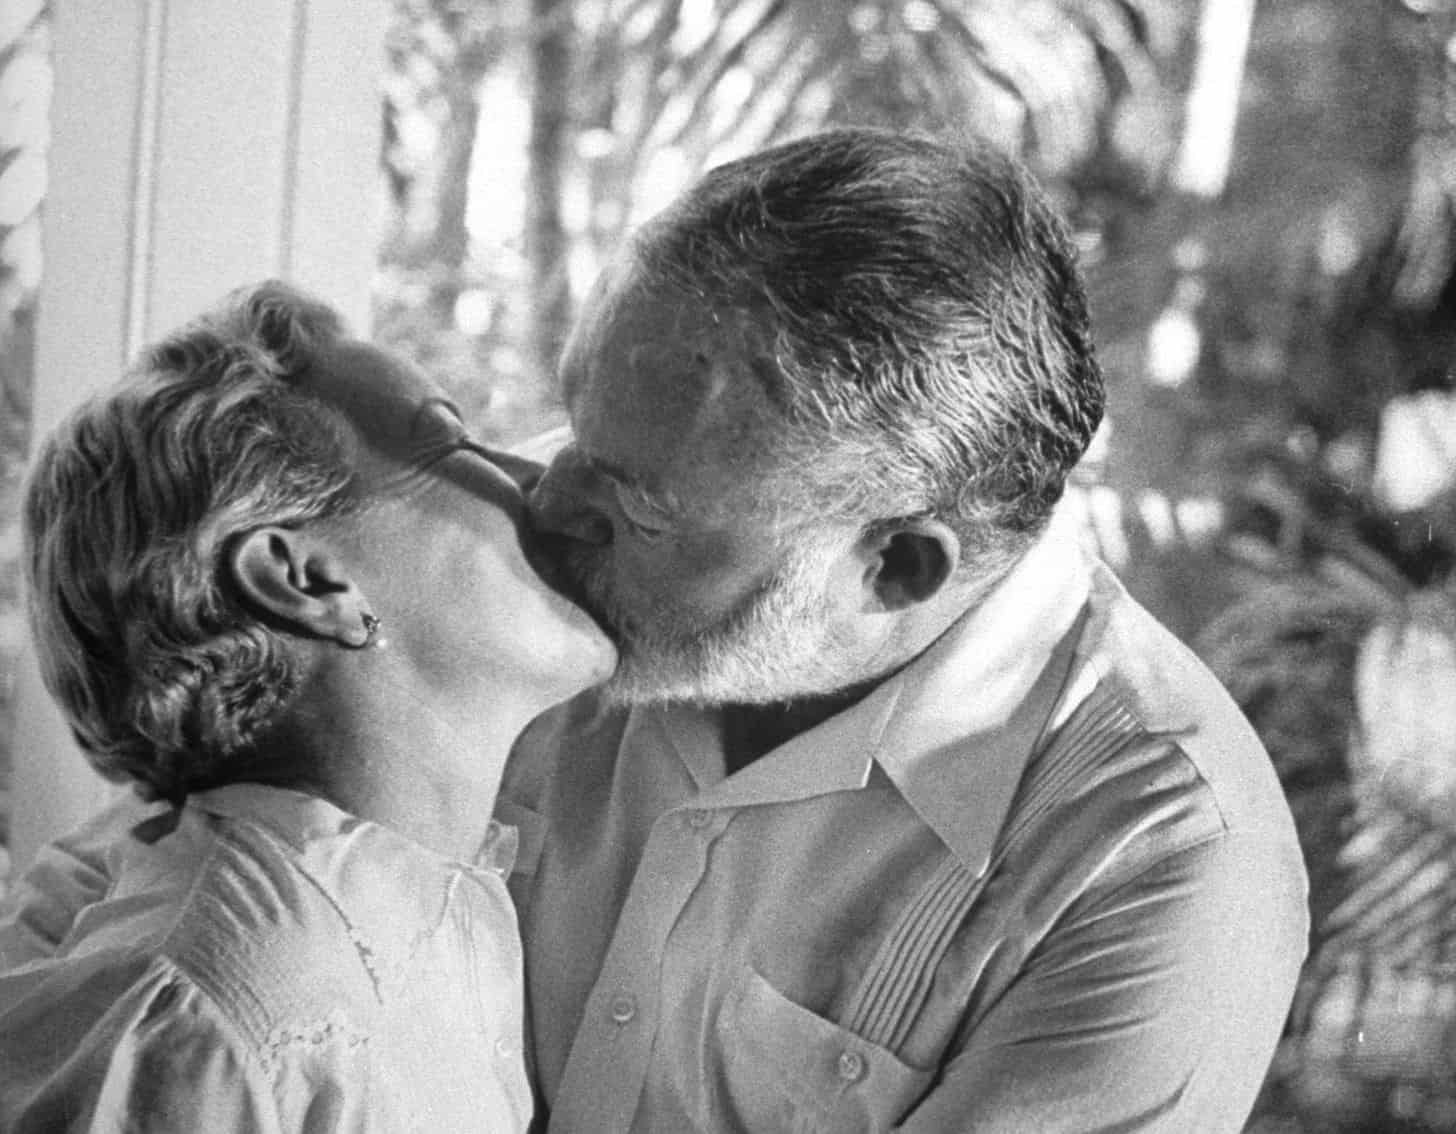 Ernest Hemingway's wife and him